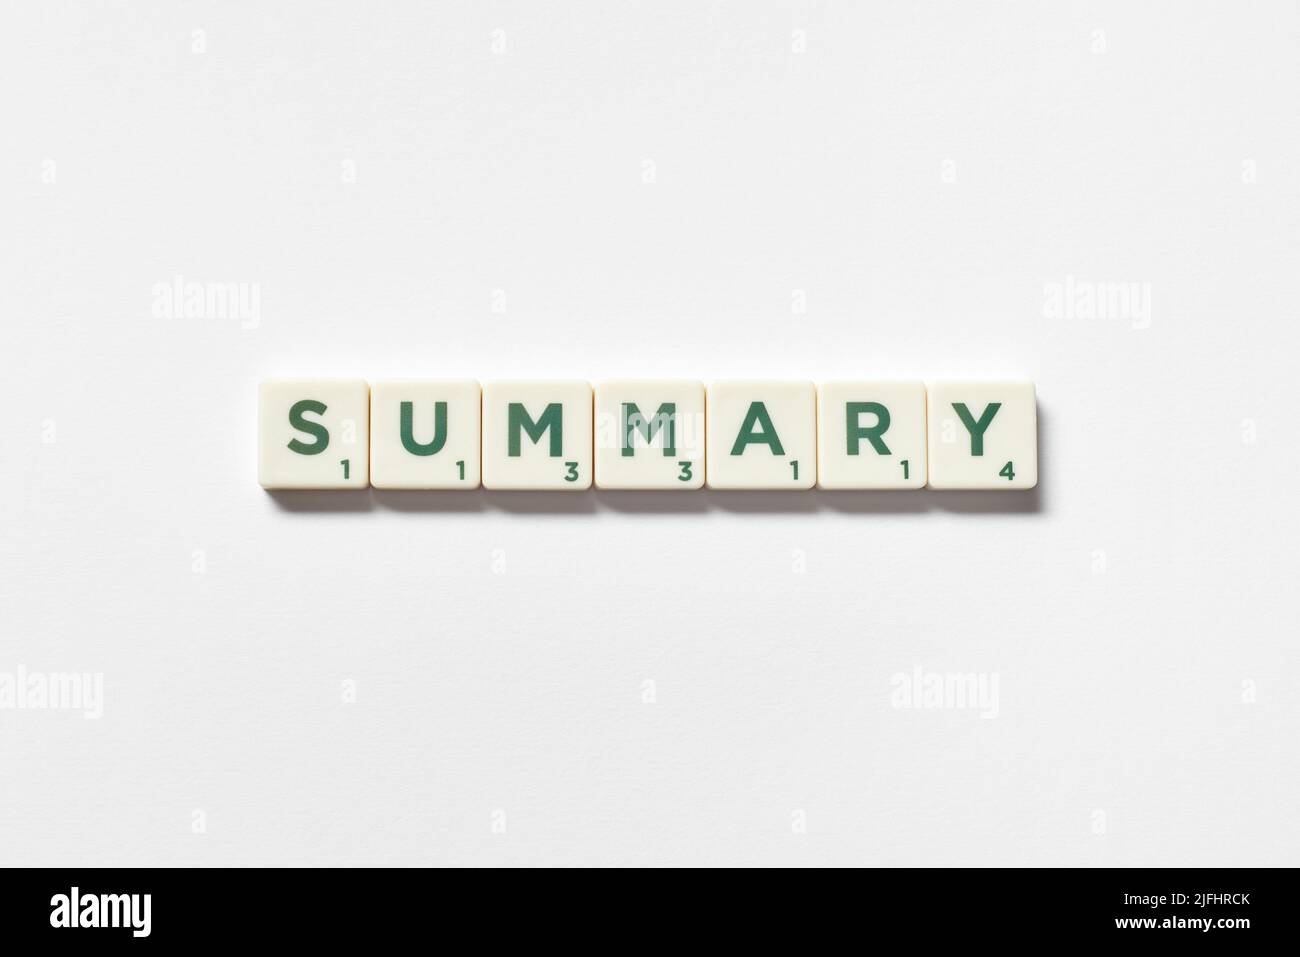 Summary formed of scrabble blocks on white background. Stock Photo